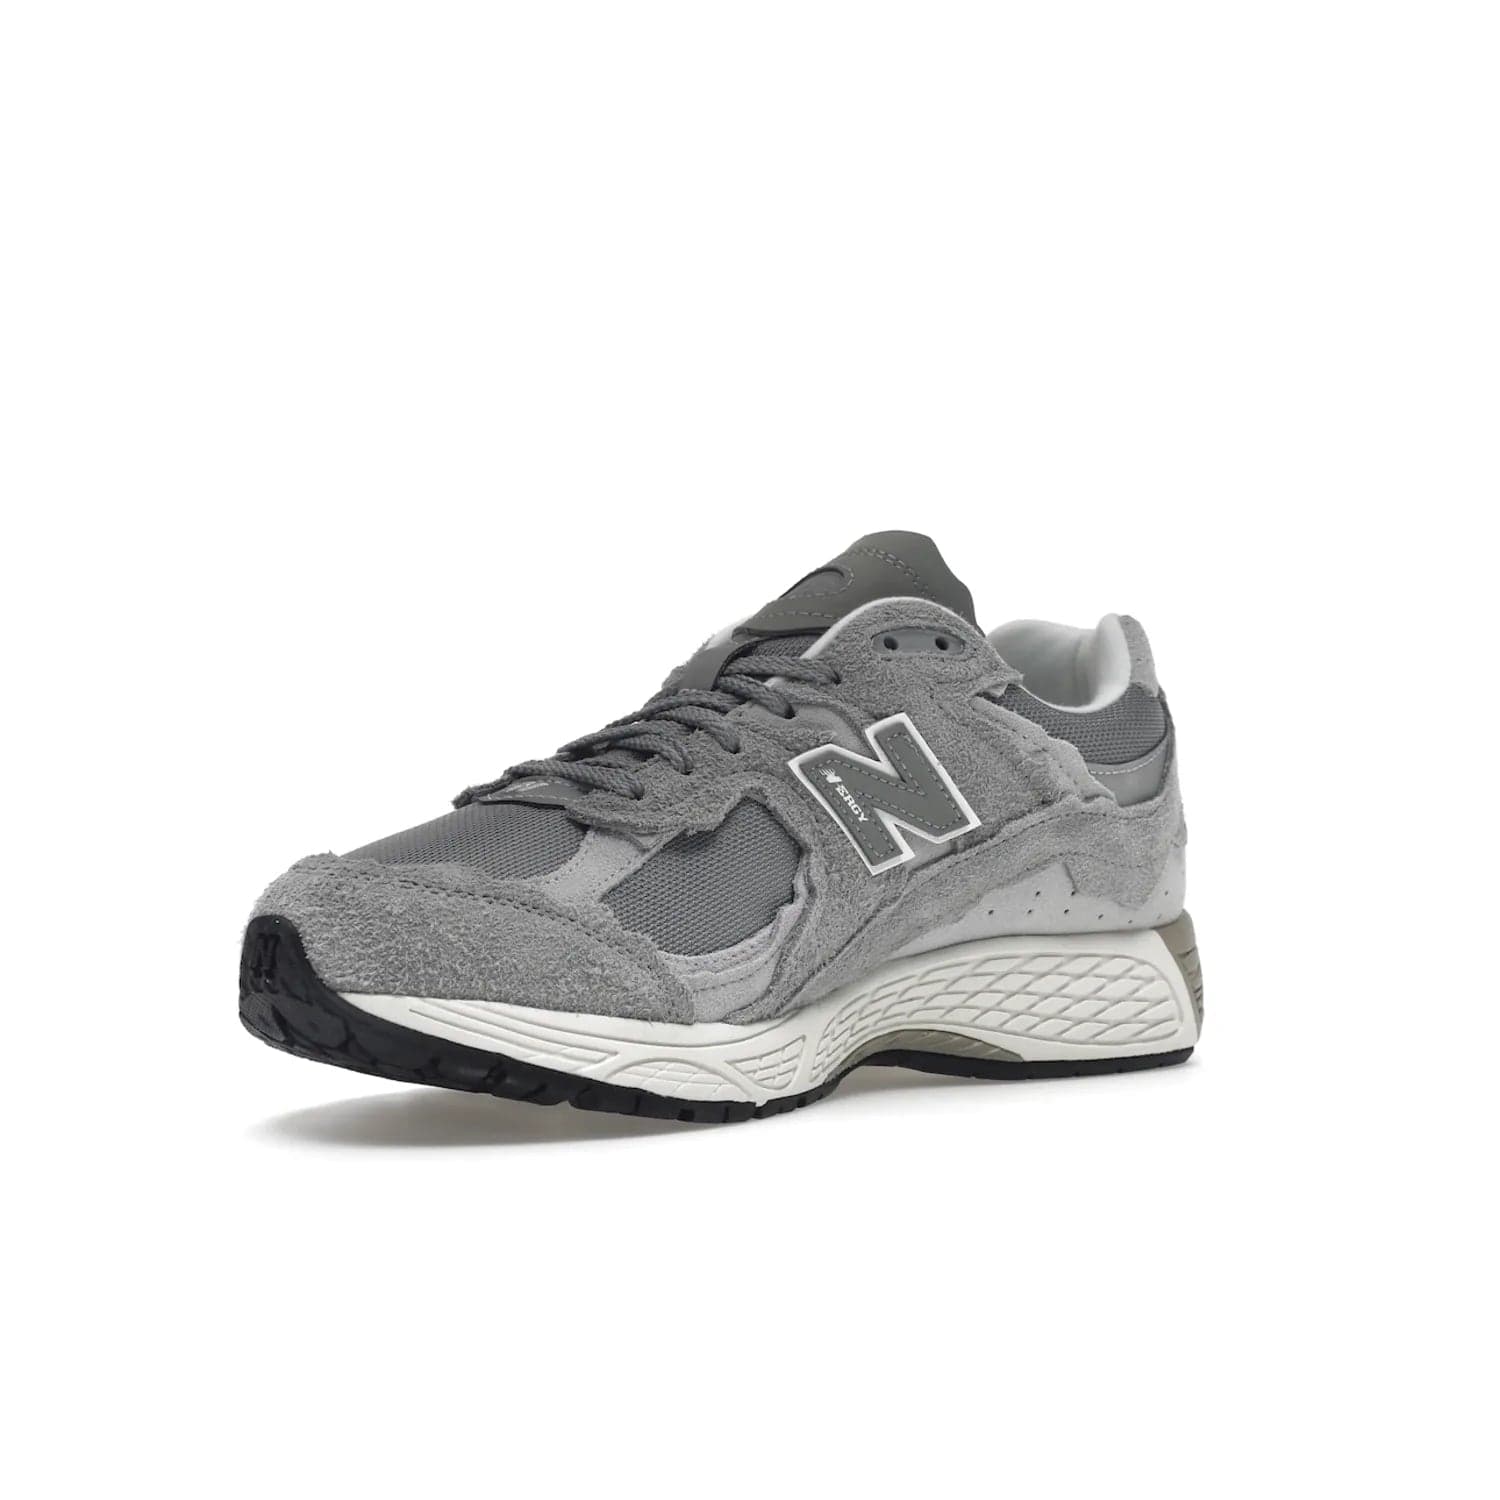 New Balance 2002R Protection Pack Grey - Image 15 - Only at www.BallersClubKickz.com - The New Balance 2002R Protection Pack Grey provides superior protection and all-day comfort. It features a blend of synthetic and mesh materials, foam midsole, rubber outsole, and a toe cap and heel counter. Show off the classic "N" logo and "2002R" lettering. Get a pair on February 14, 2023 for protection and style.